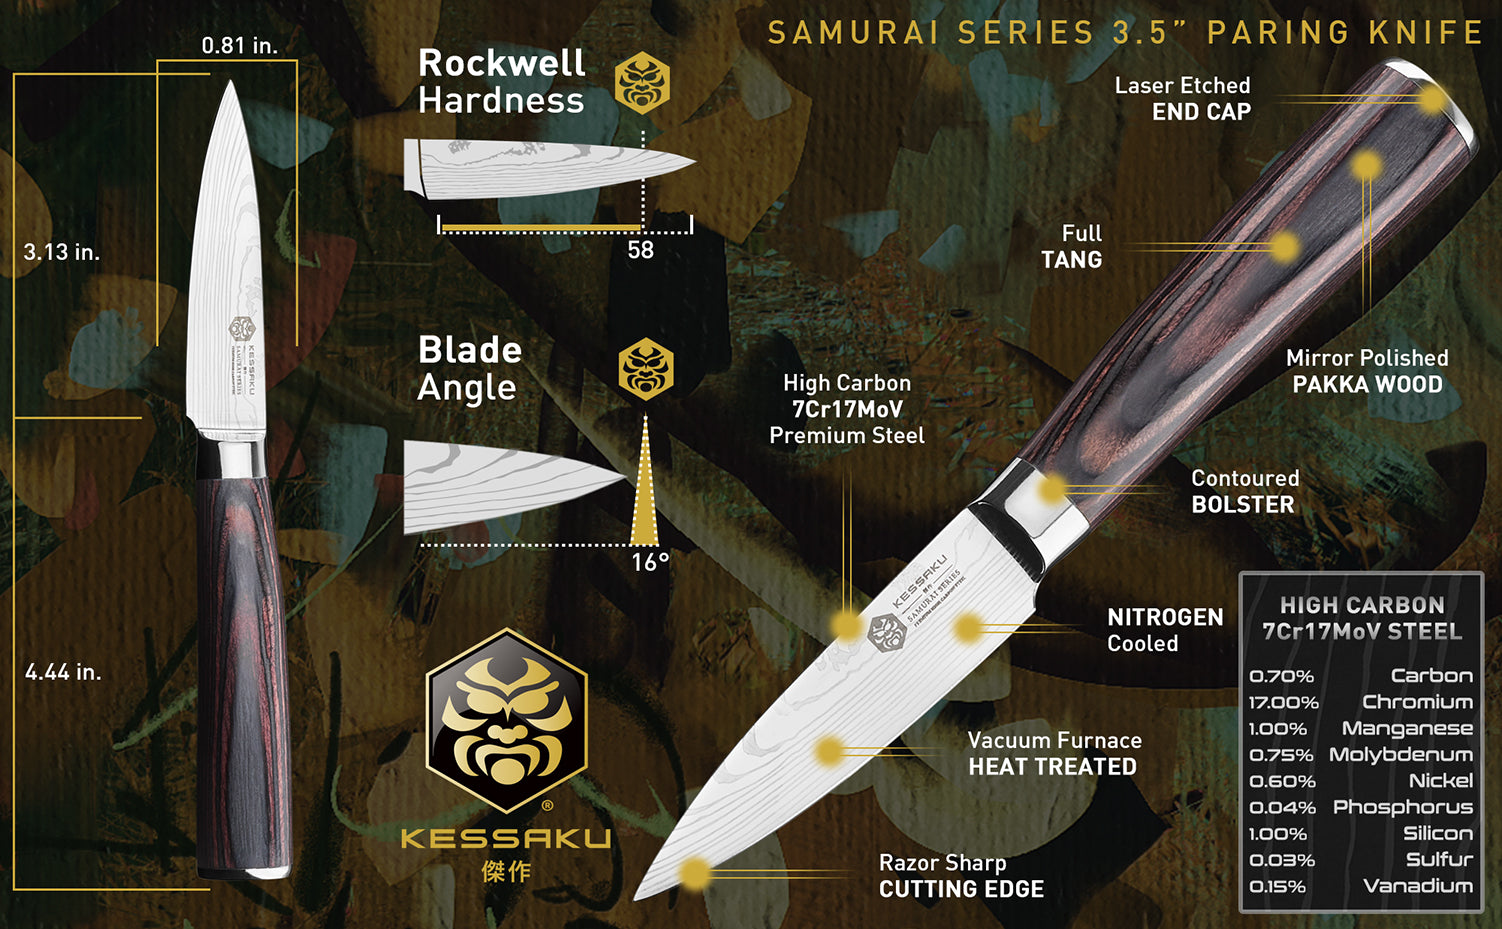 The Kessaku Samurai Series 3.5-Inch Paring Knife's features, dimensions, and steel composition